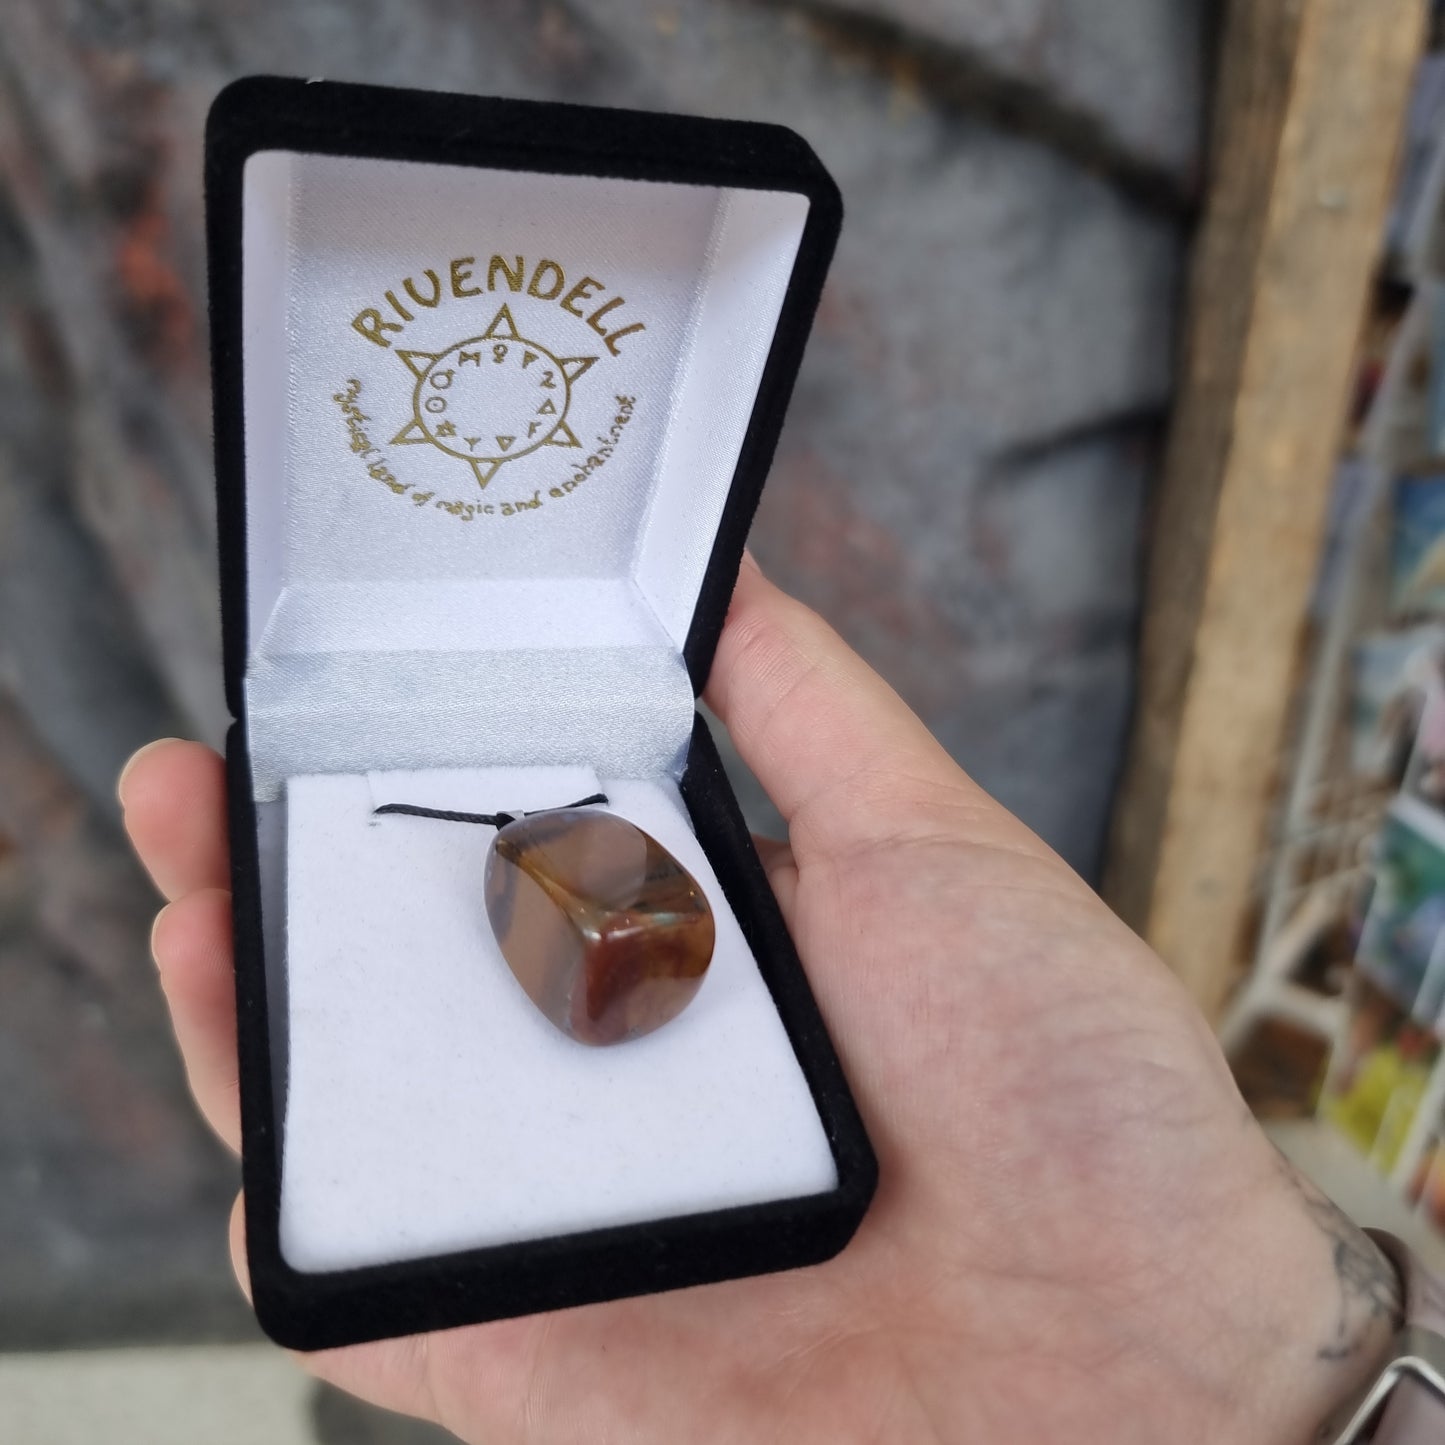 Red tigers eye tumble necklace - Rivendell Shop